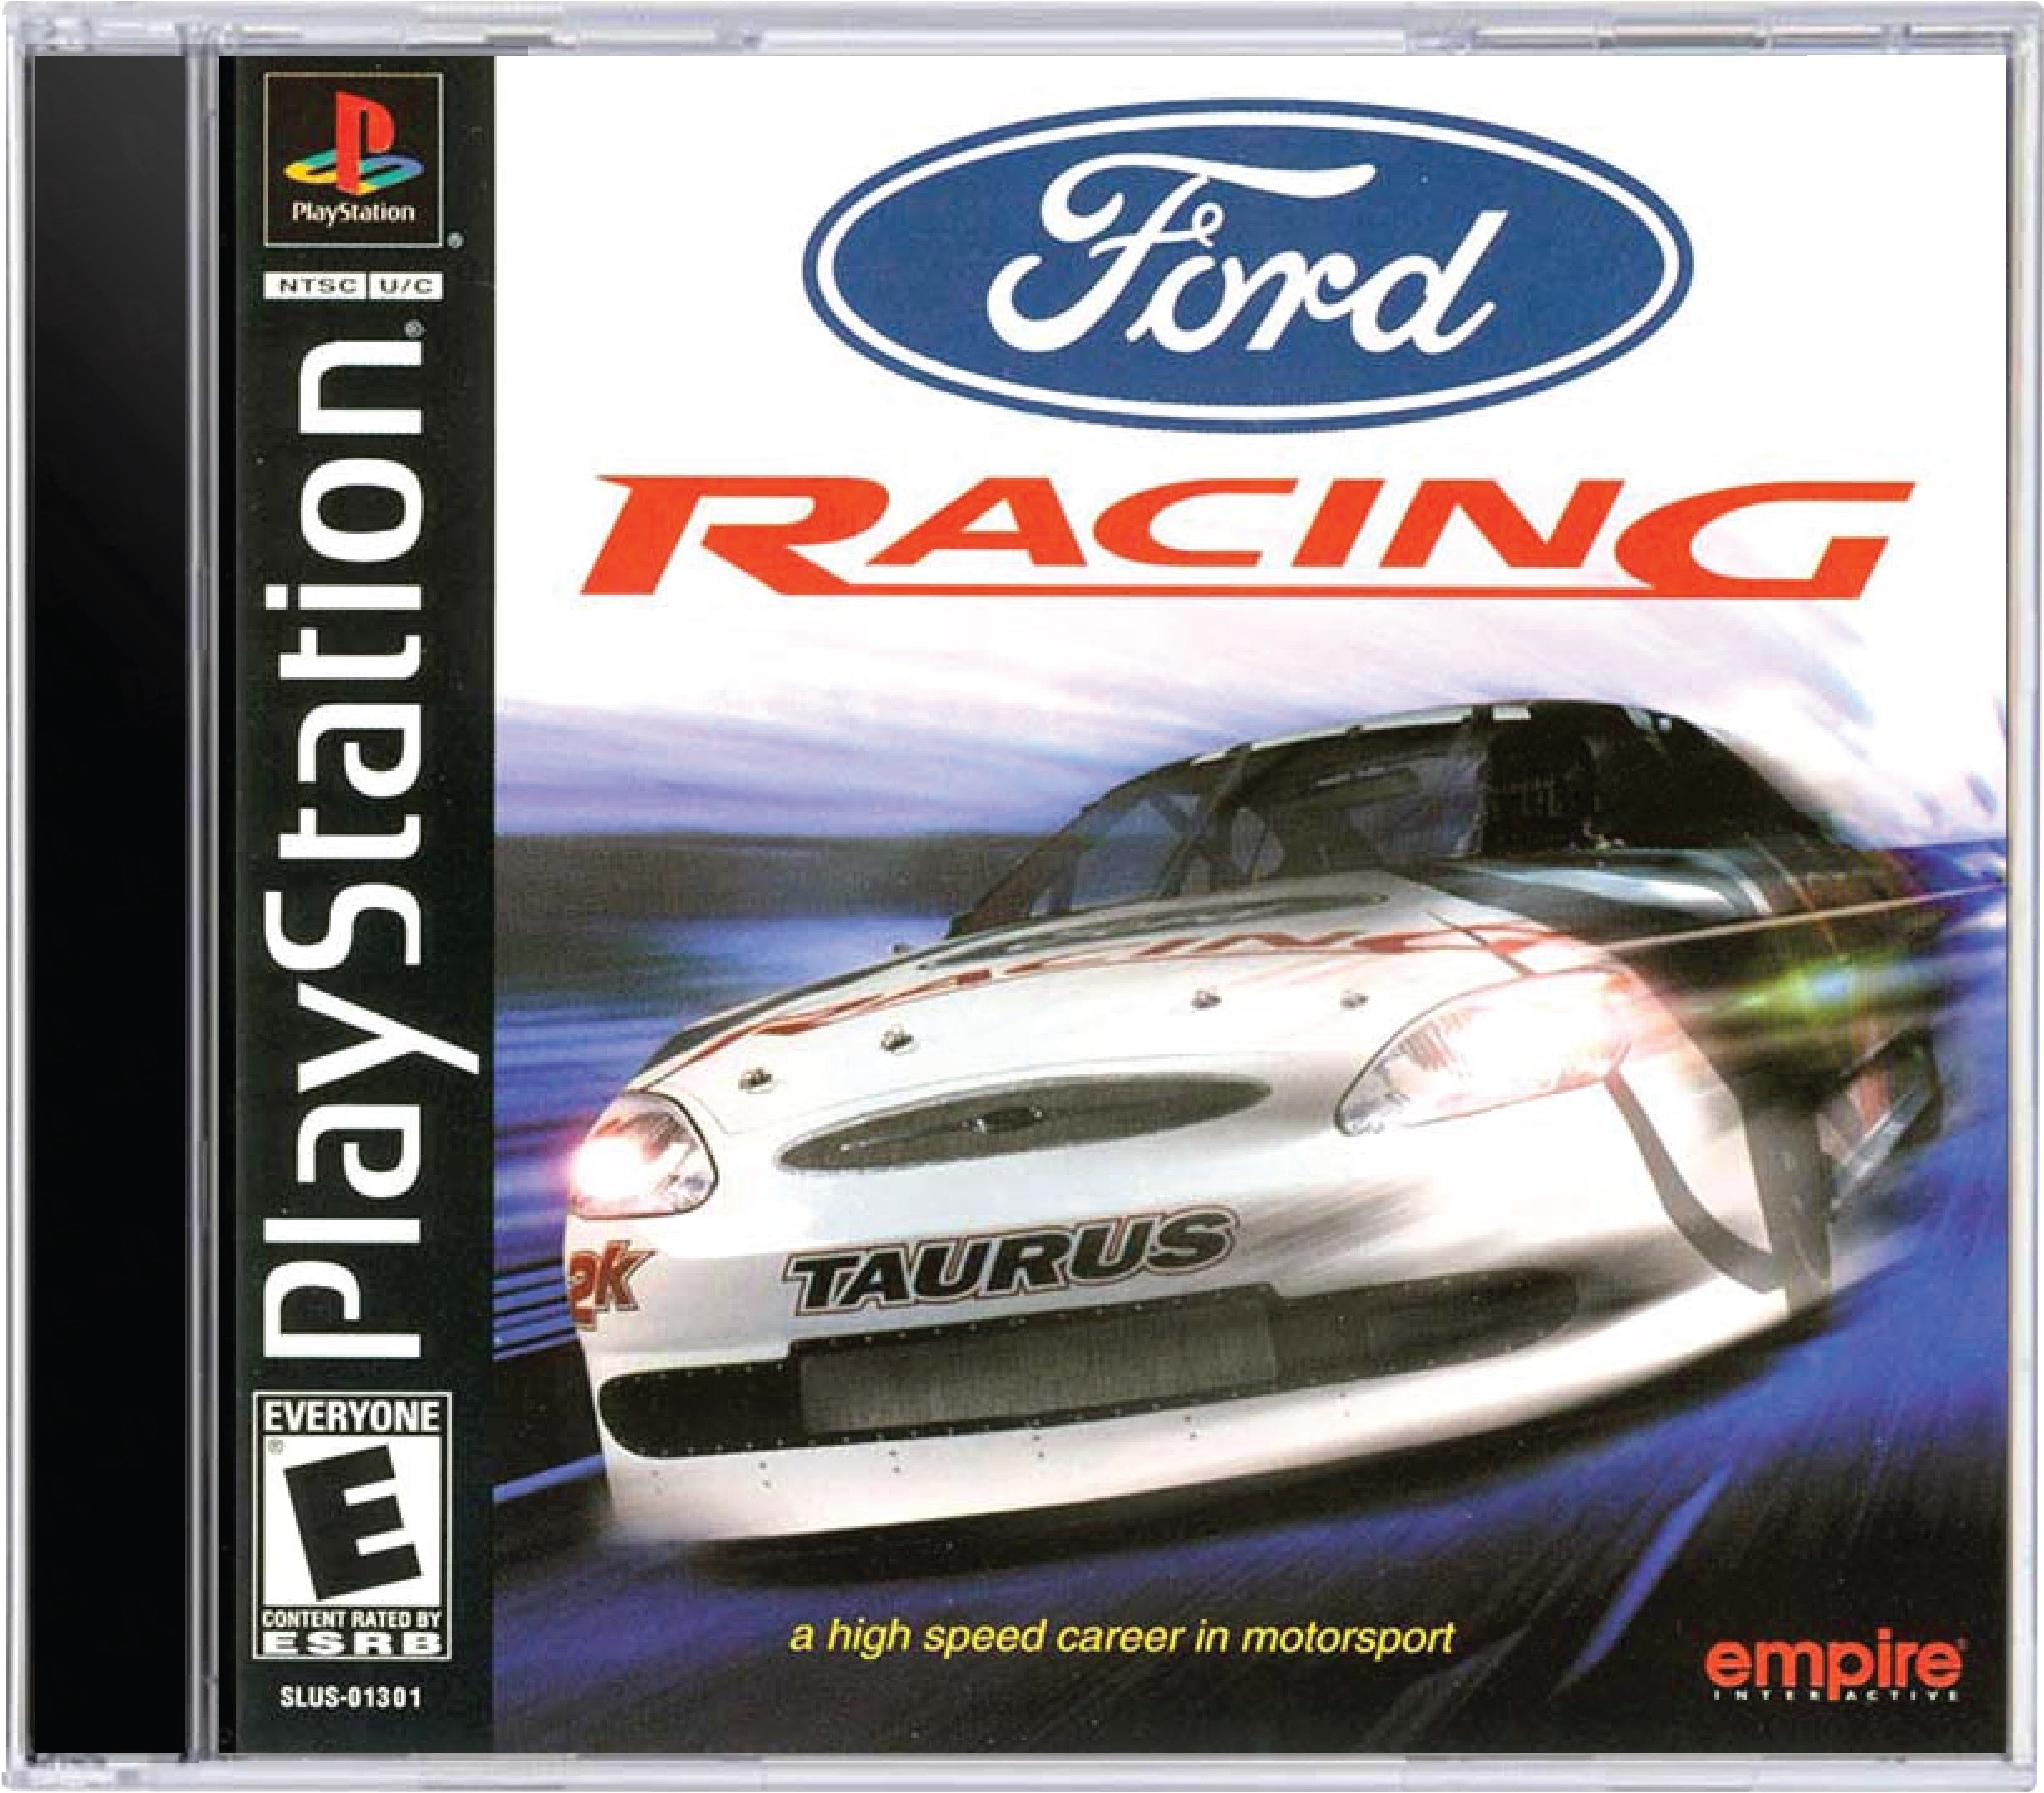 Ford Racing Cover Art and Product Photo